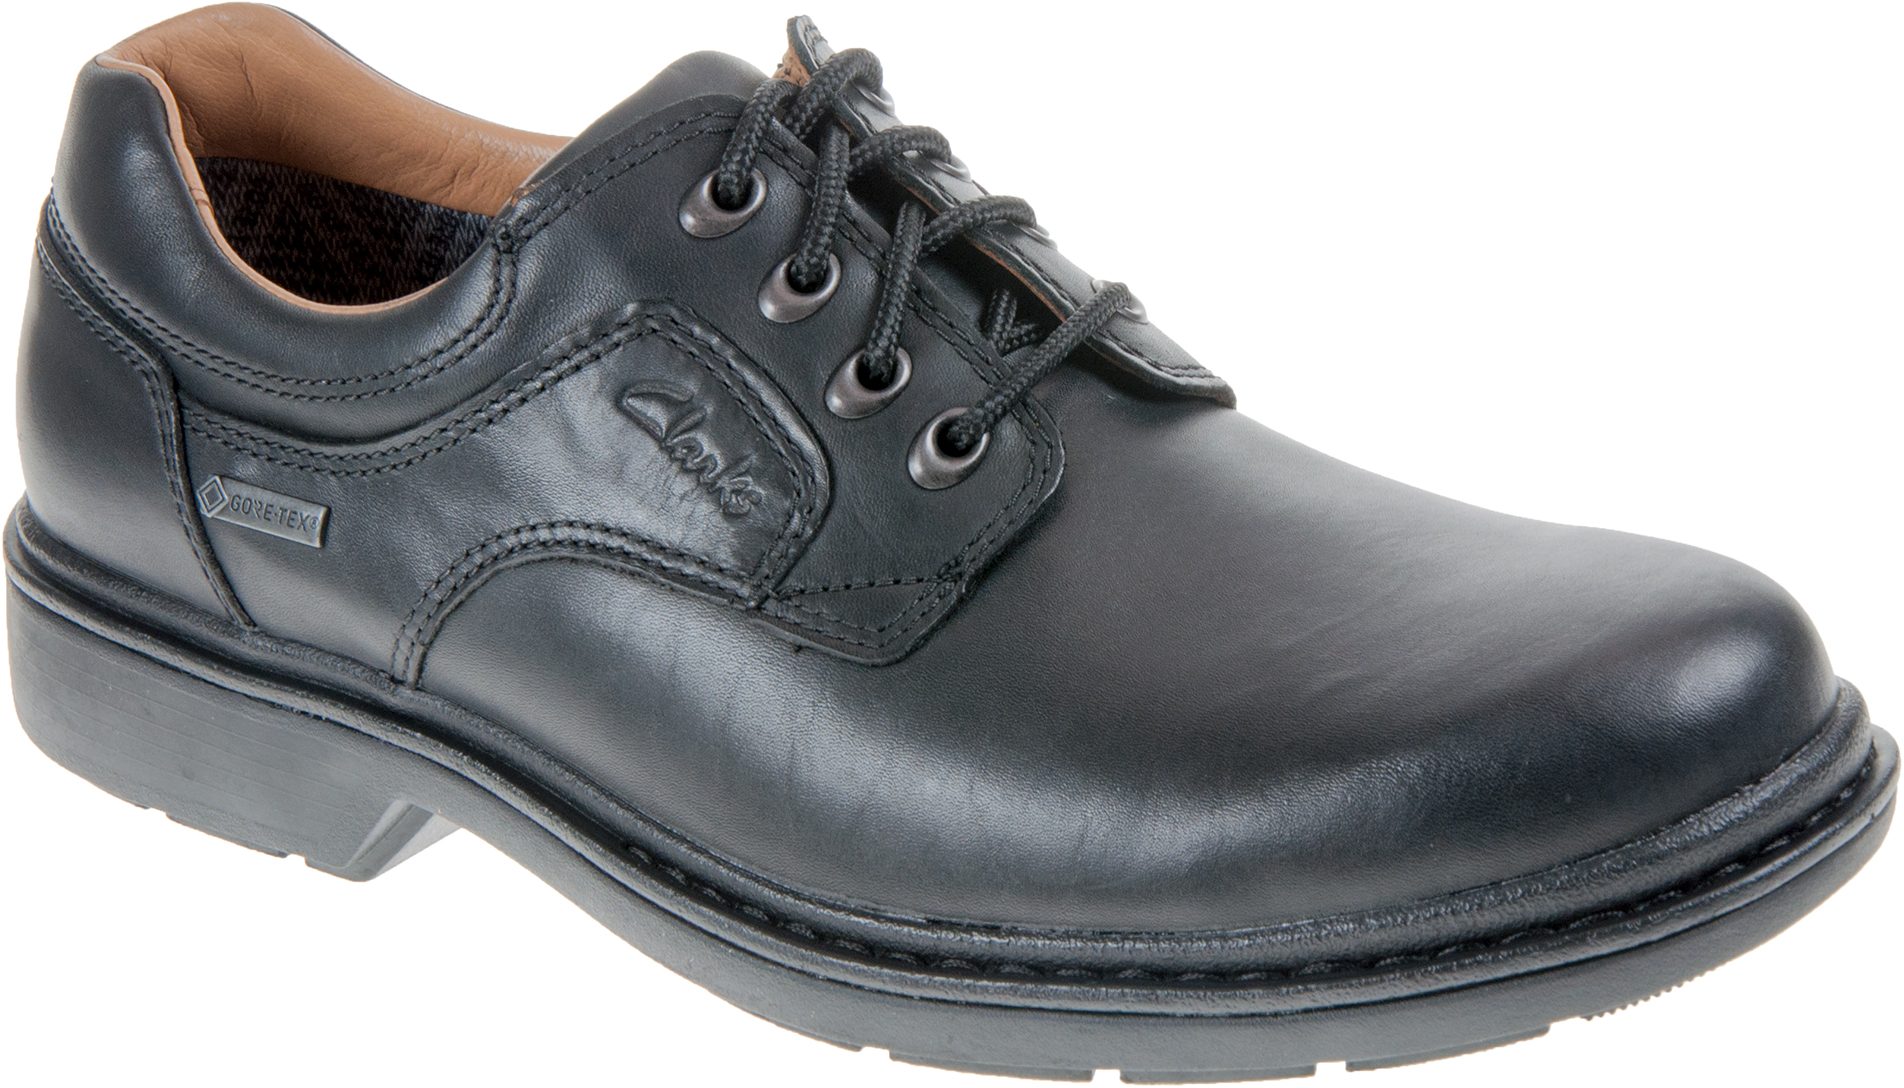 Clarks Rockie Lo Gore-Tex Black 20318607 Casual Shoes - Humphries Shoes